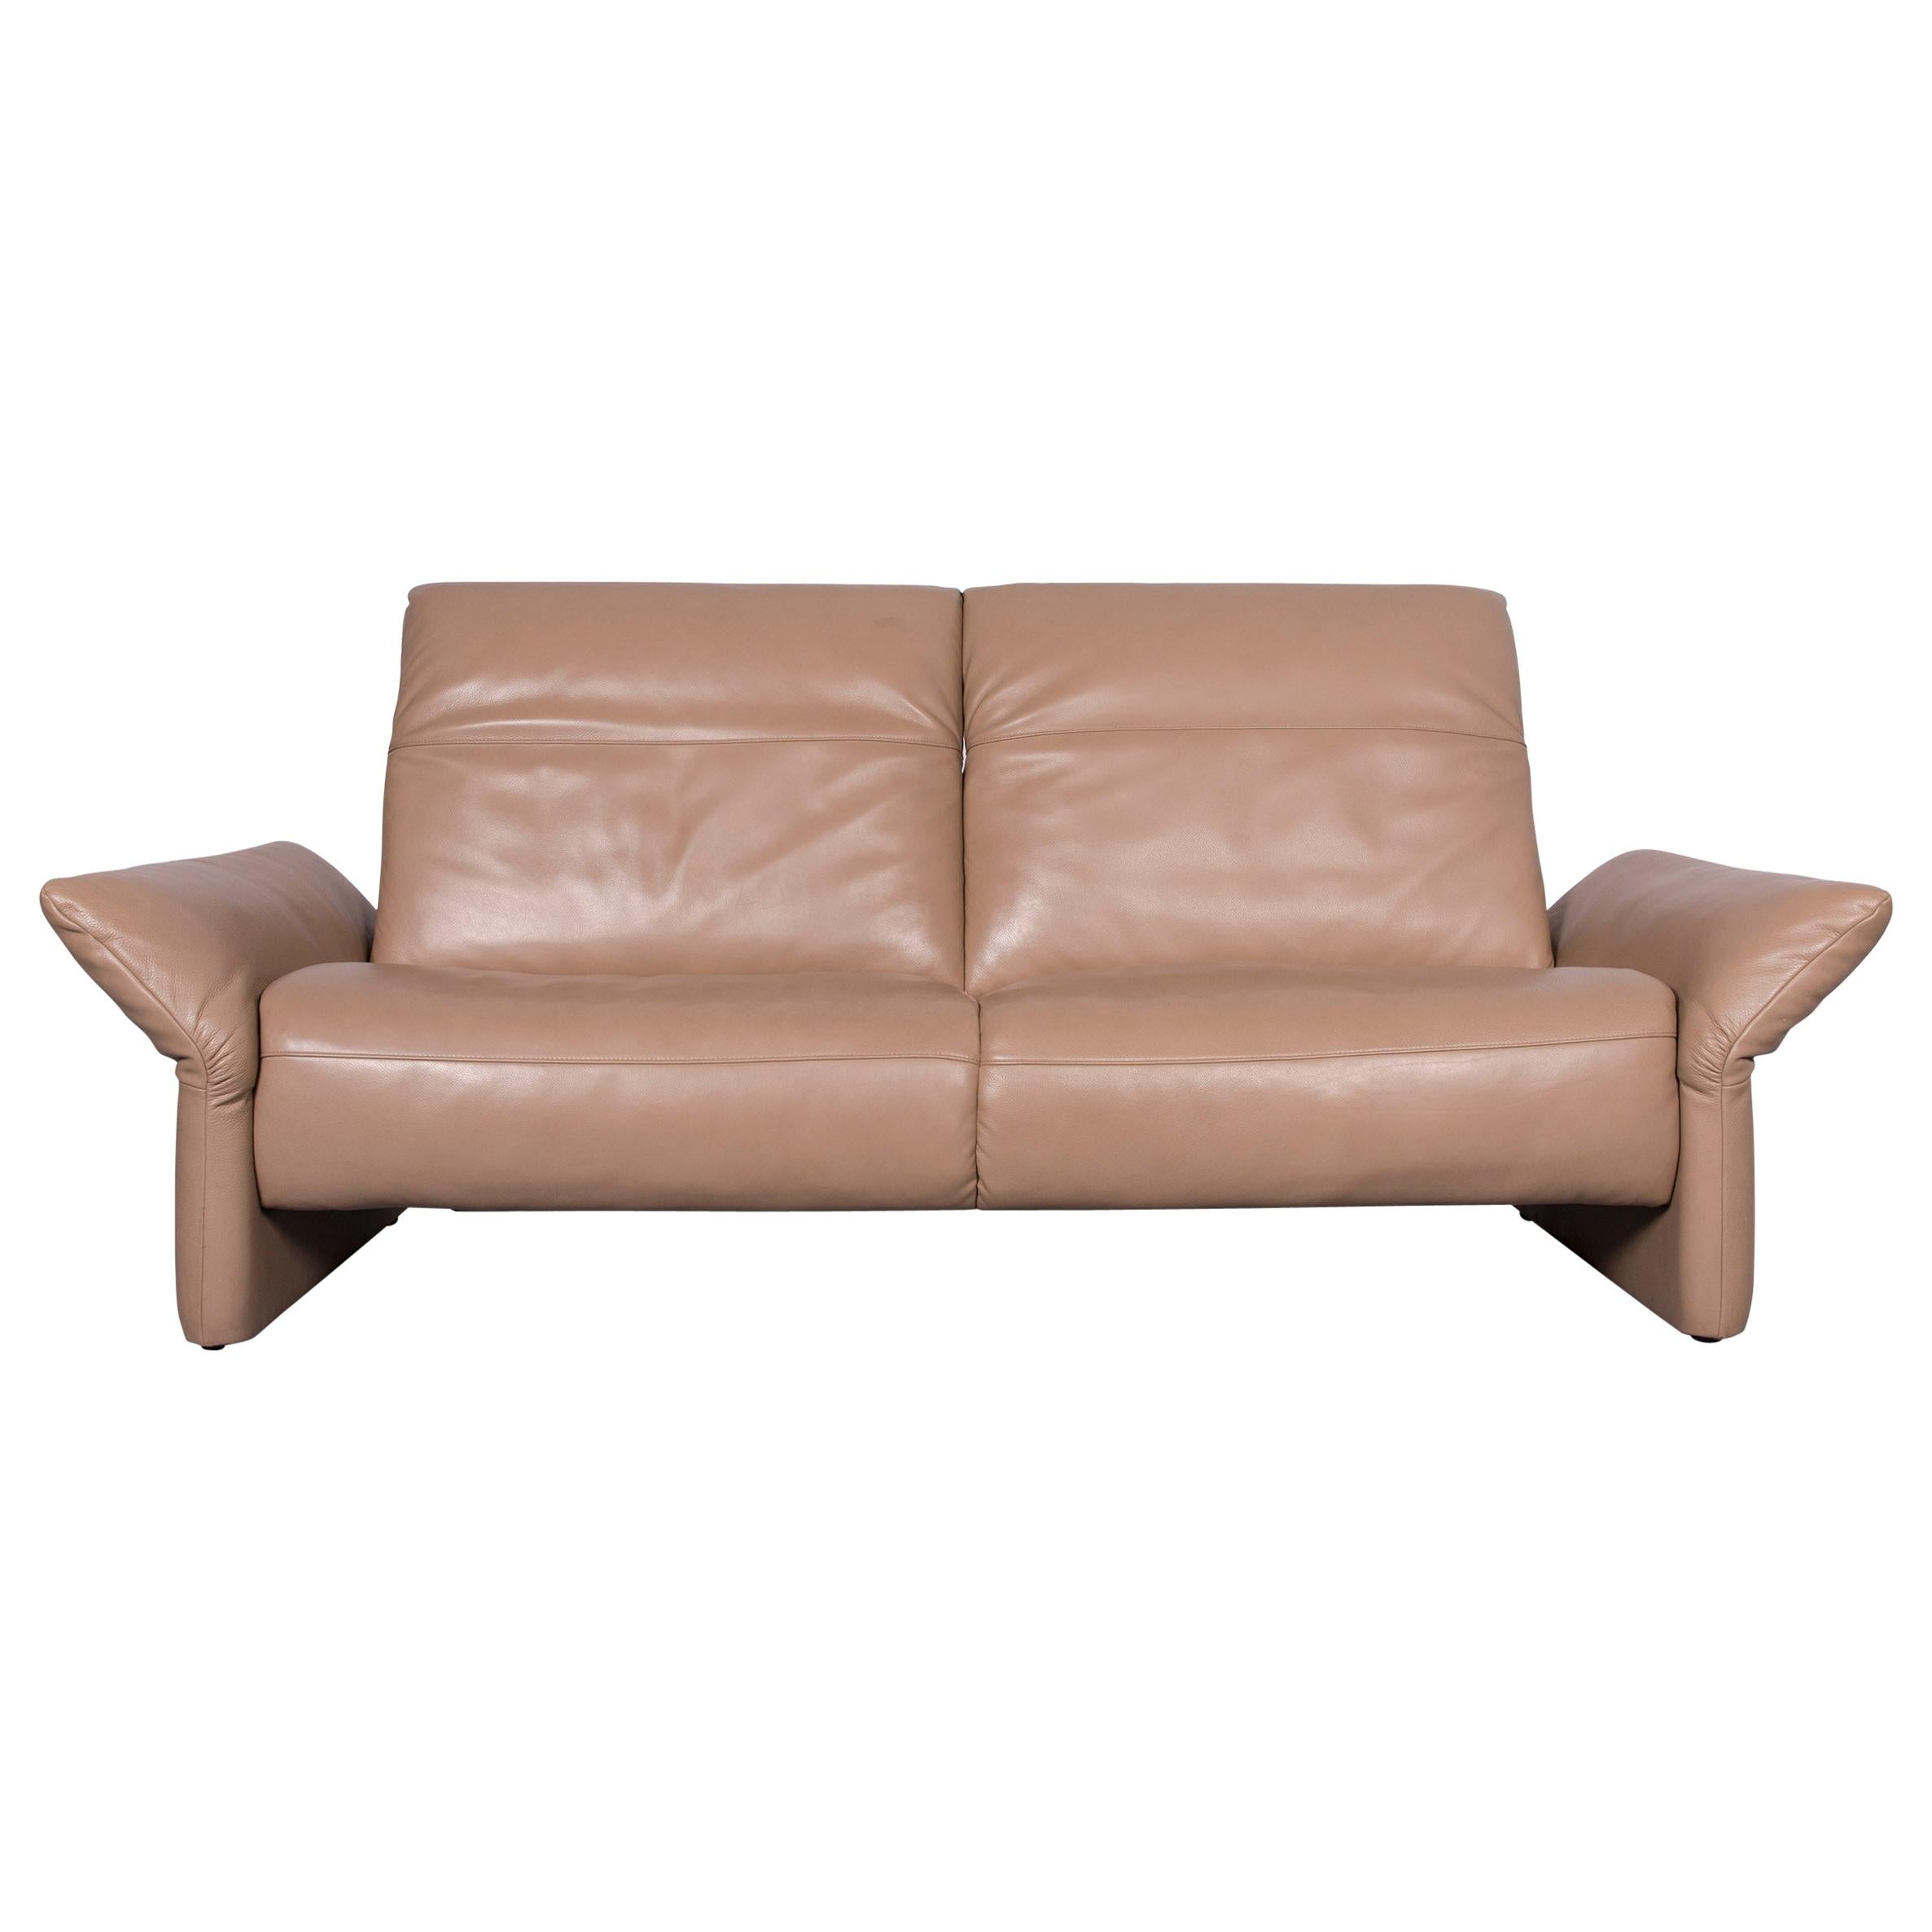 Koinor Elena Designer Leather Sofa Beige Genuine Leather Three-Seat Couch For Sale